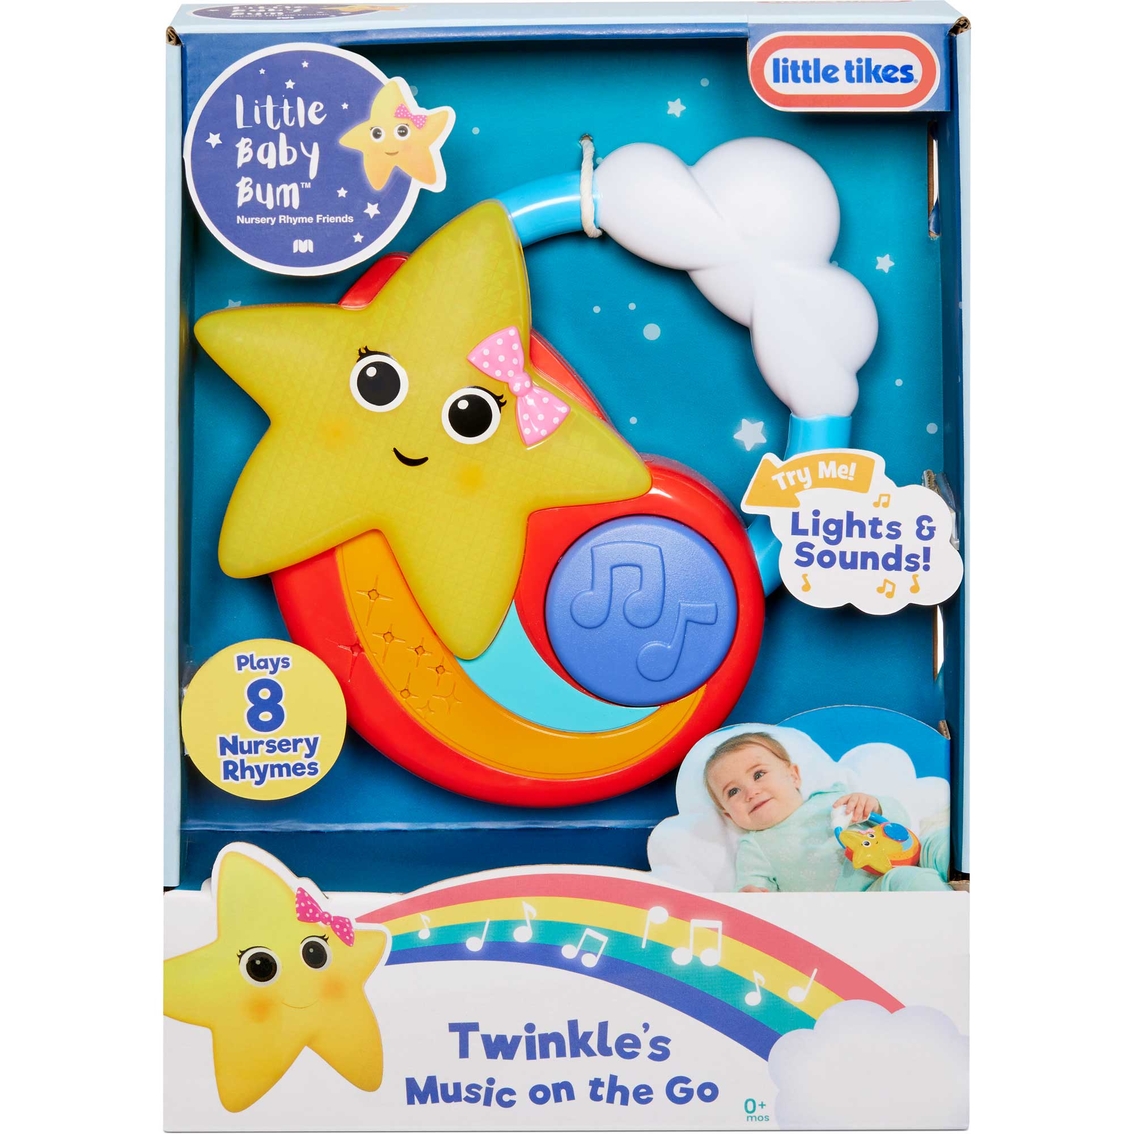 Little Tikes Little Baby Bum Twinkle's Music on the Go Infant Toy - Image 8 of 10